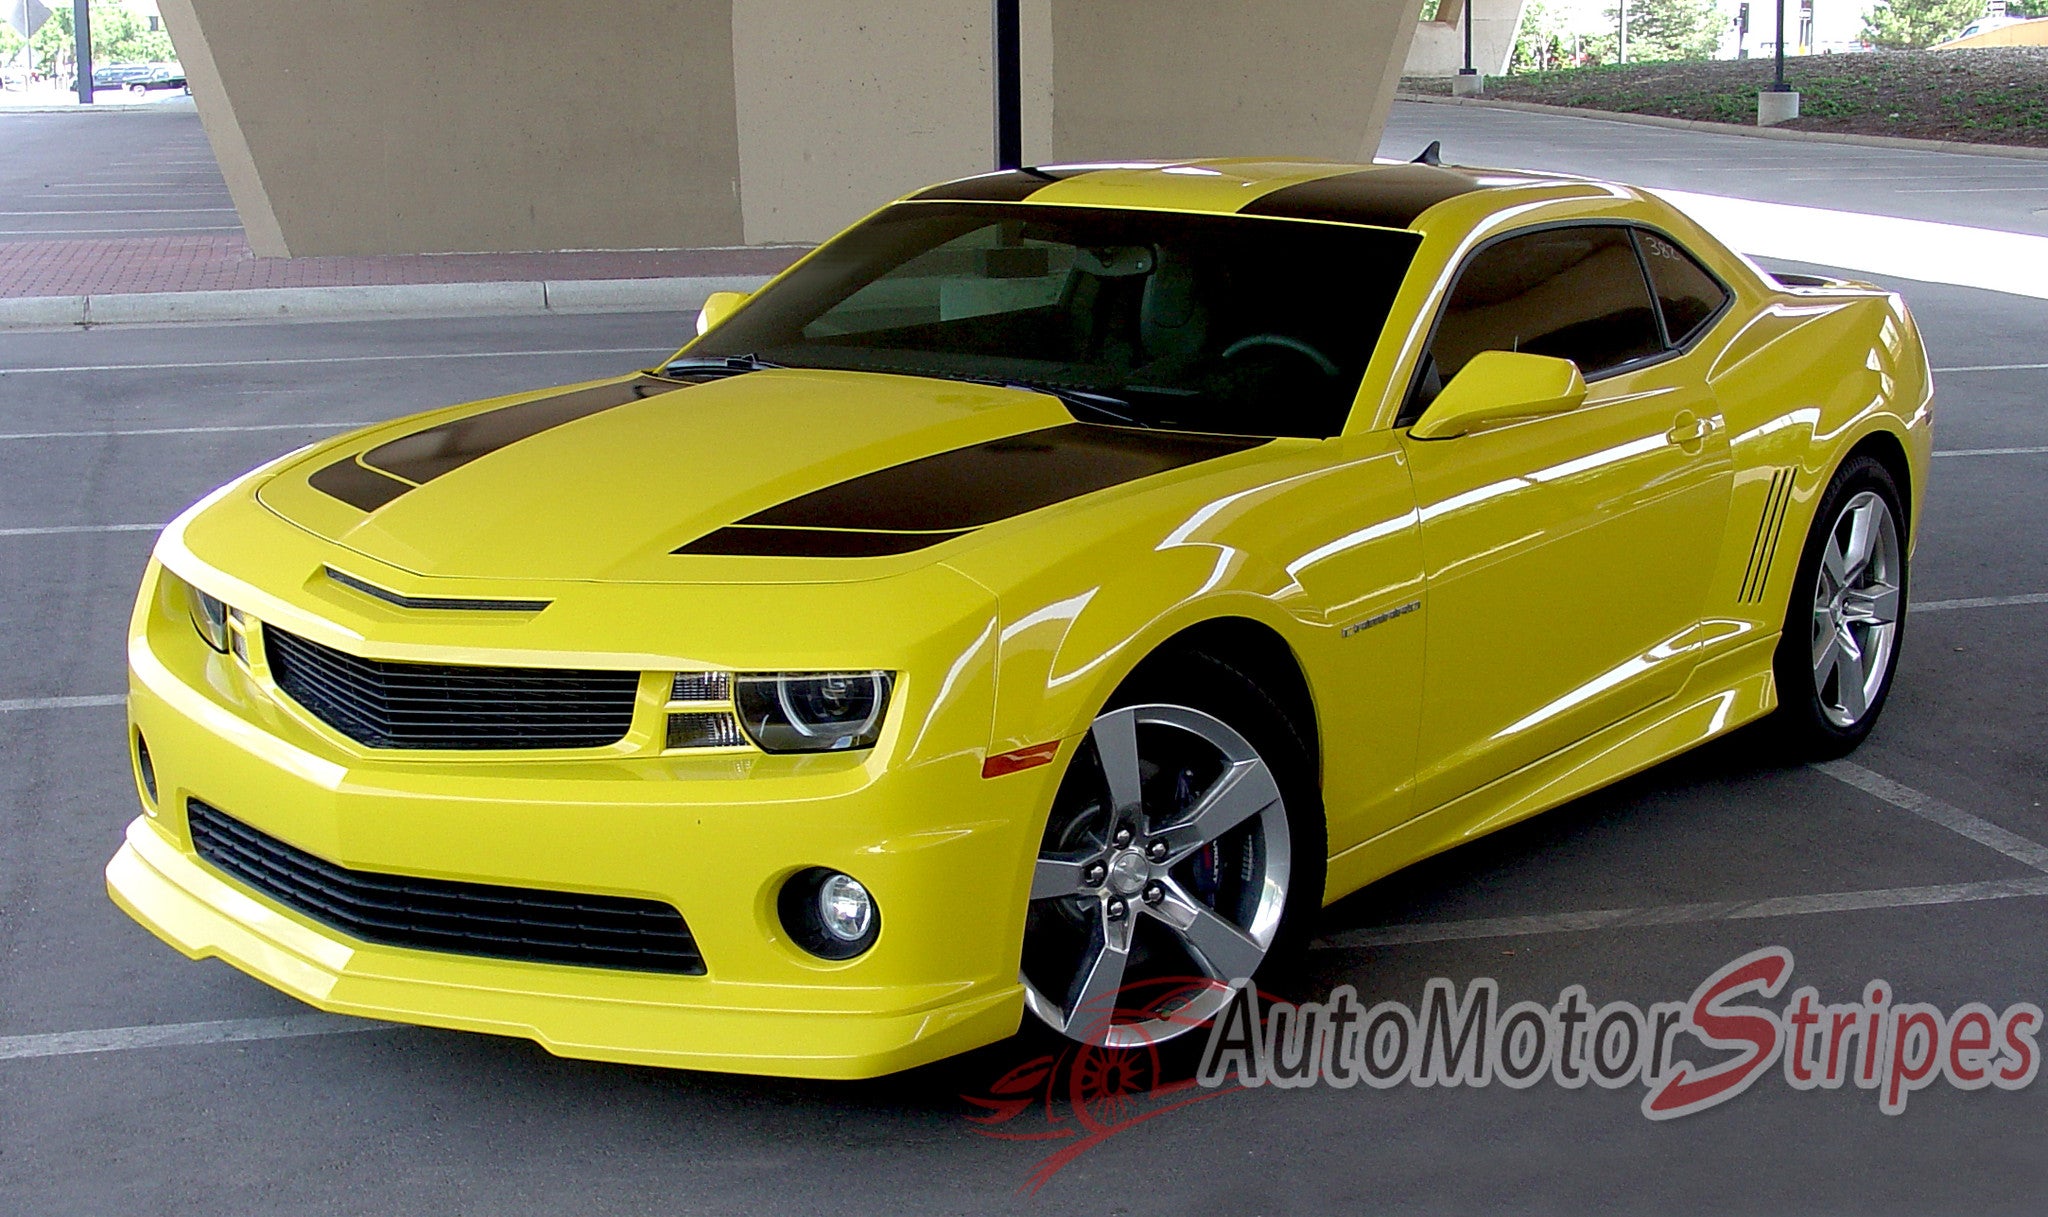 Featured image of post 2012 Camaro Bumblebee Stripes Bumblebee is a prequel to the most recent transformers movies set in an 80s beach town